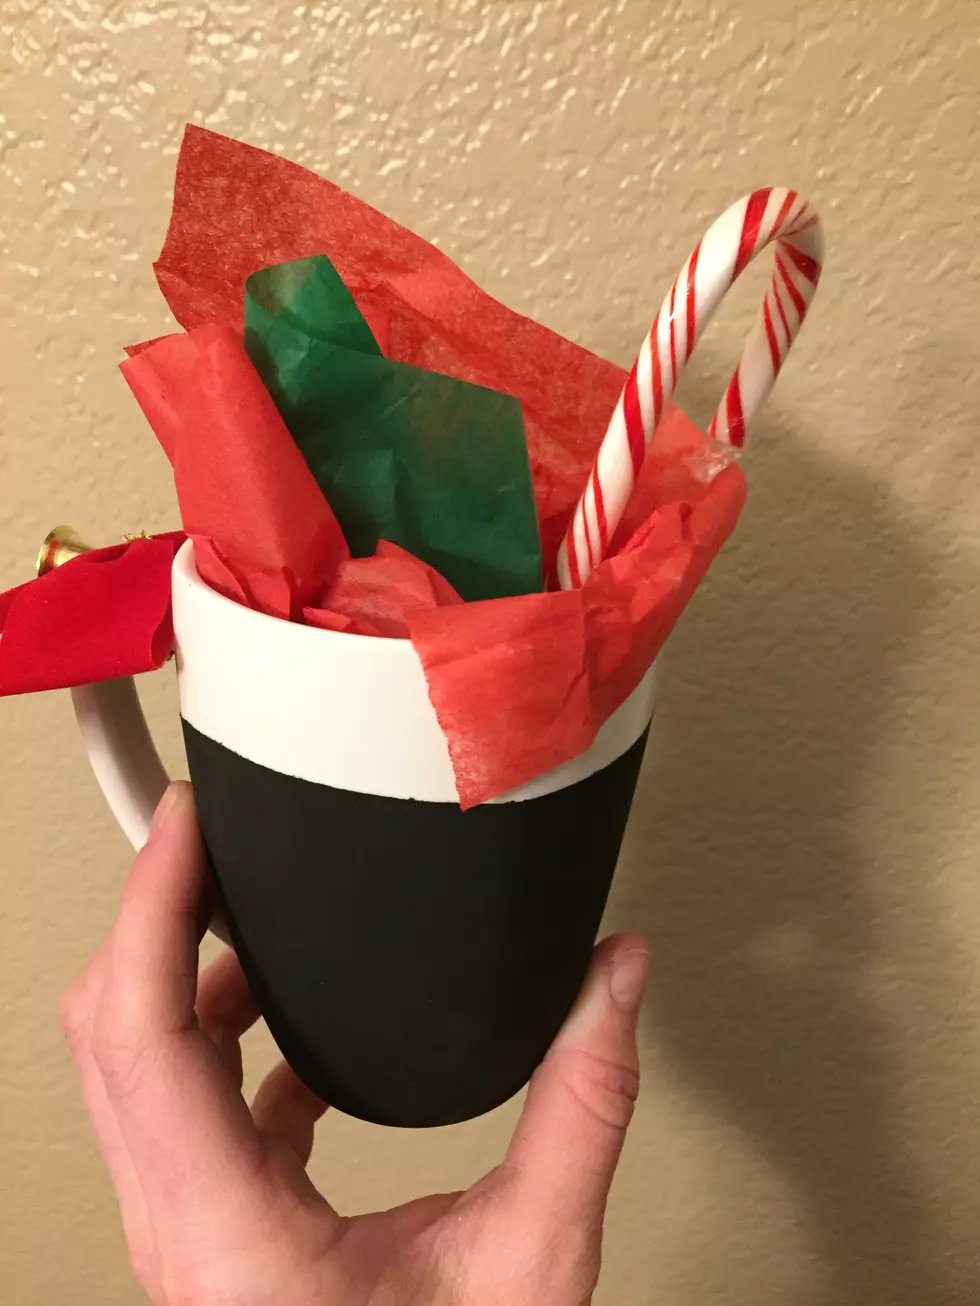 Homemade Christmas Mug Project, A Great Gift For Friends And Family